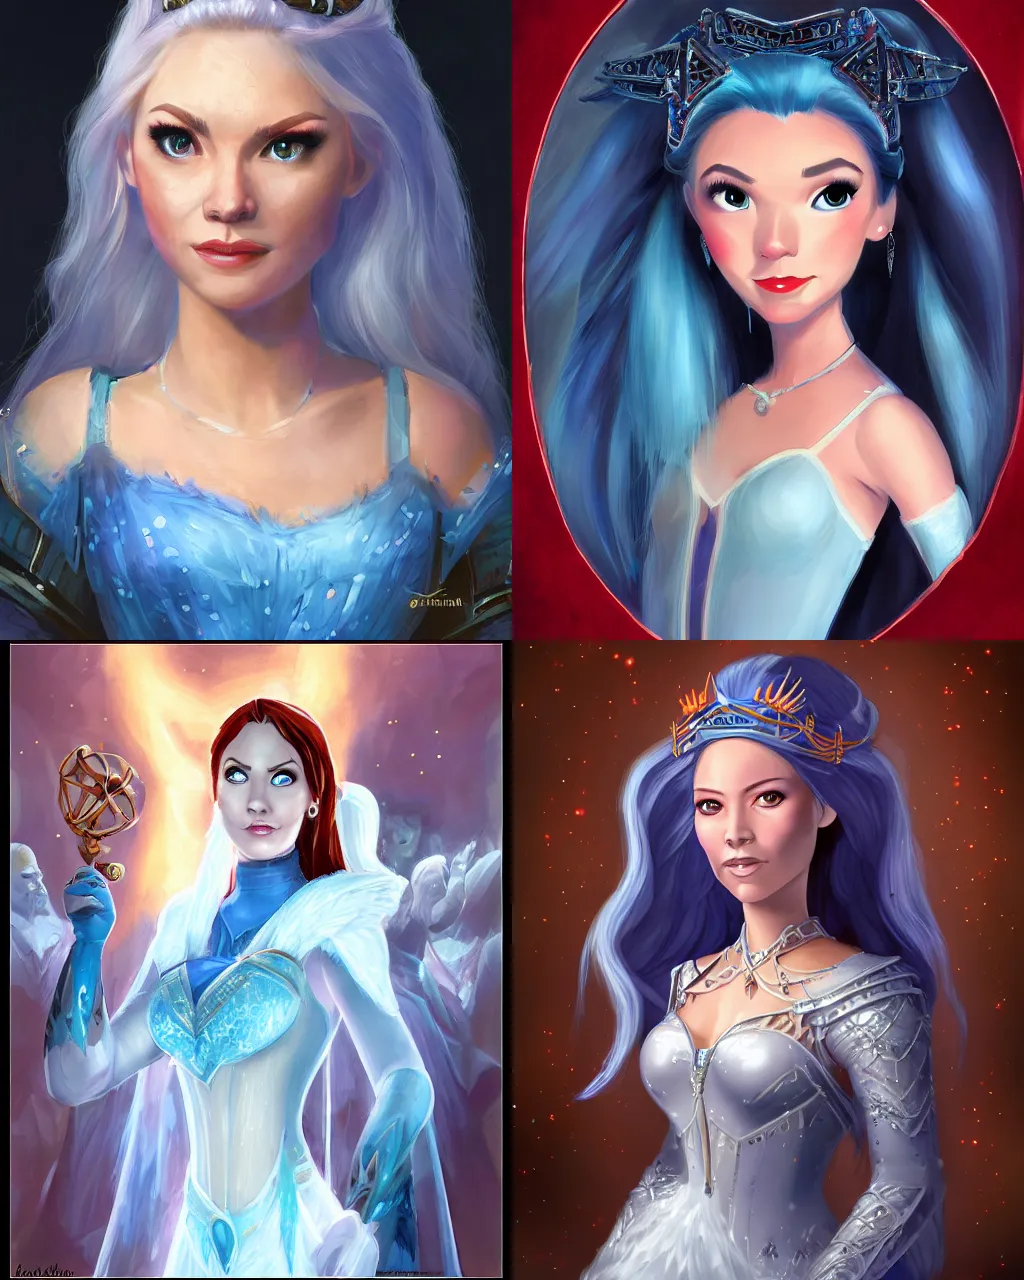 ArtStation - Arioch and Ibee in the Barbie universe